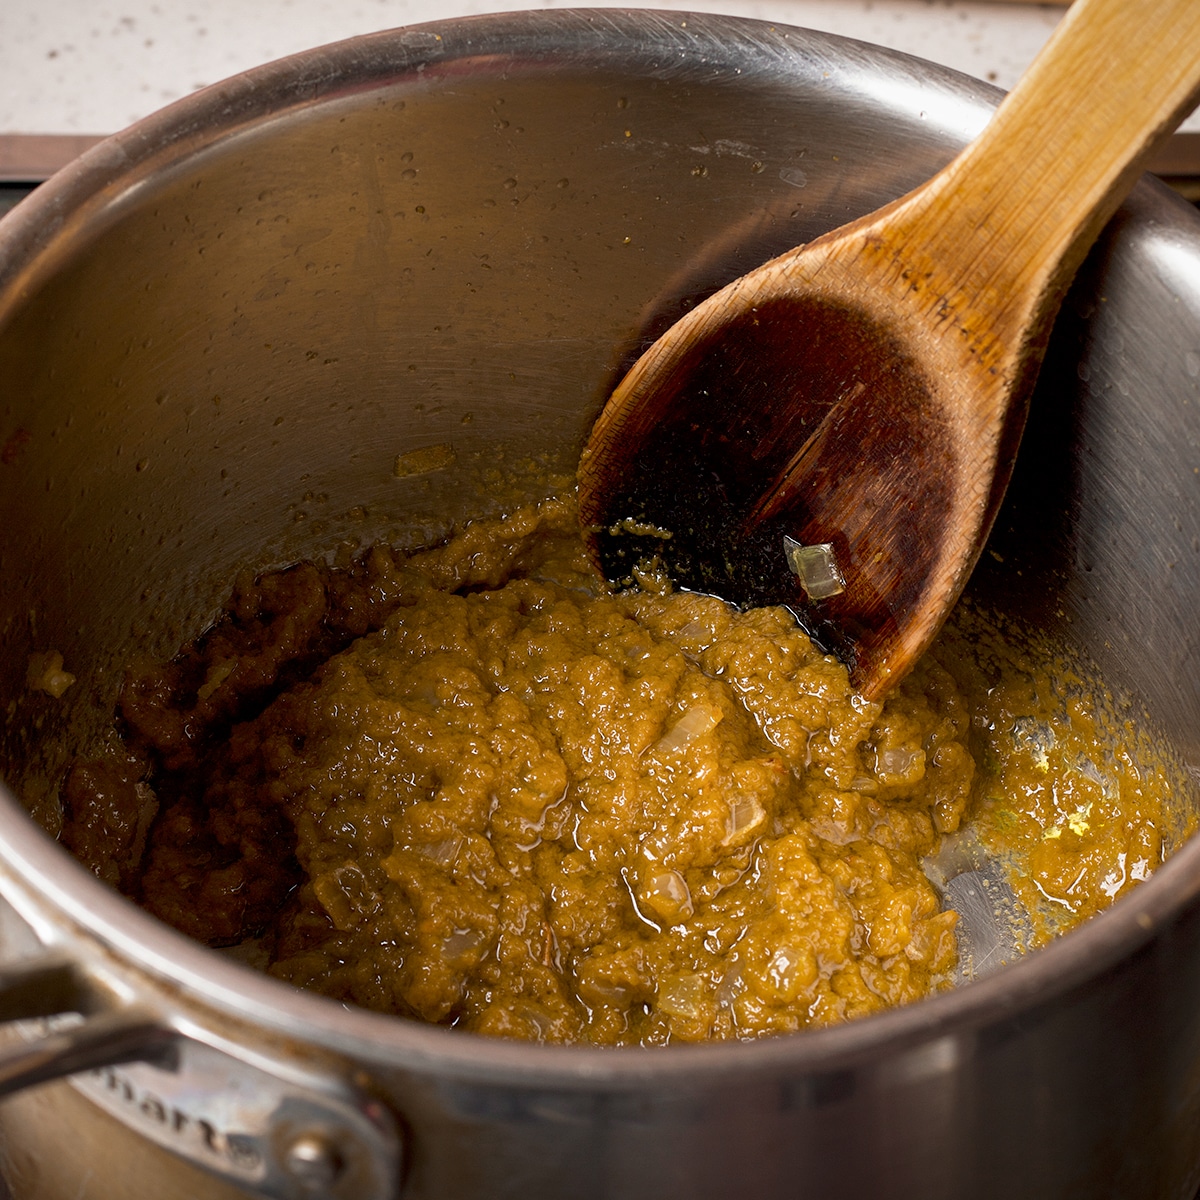 Using a wooden spoon to stir green curry paste into cooked onions and shallots in a saucepan.